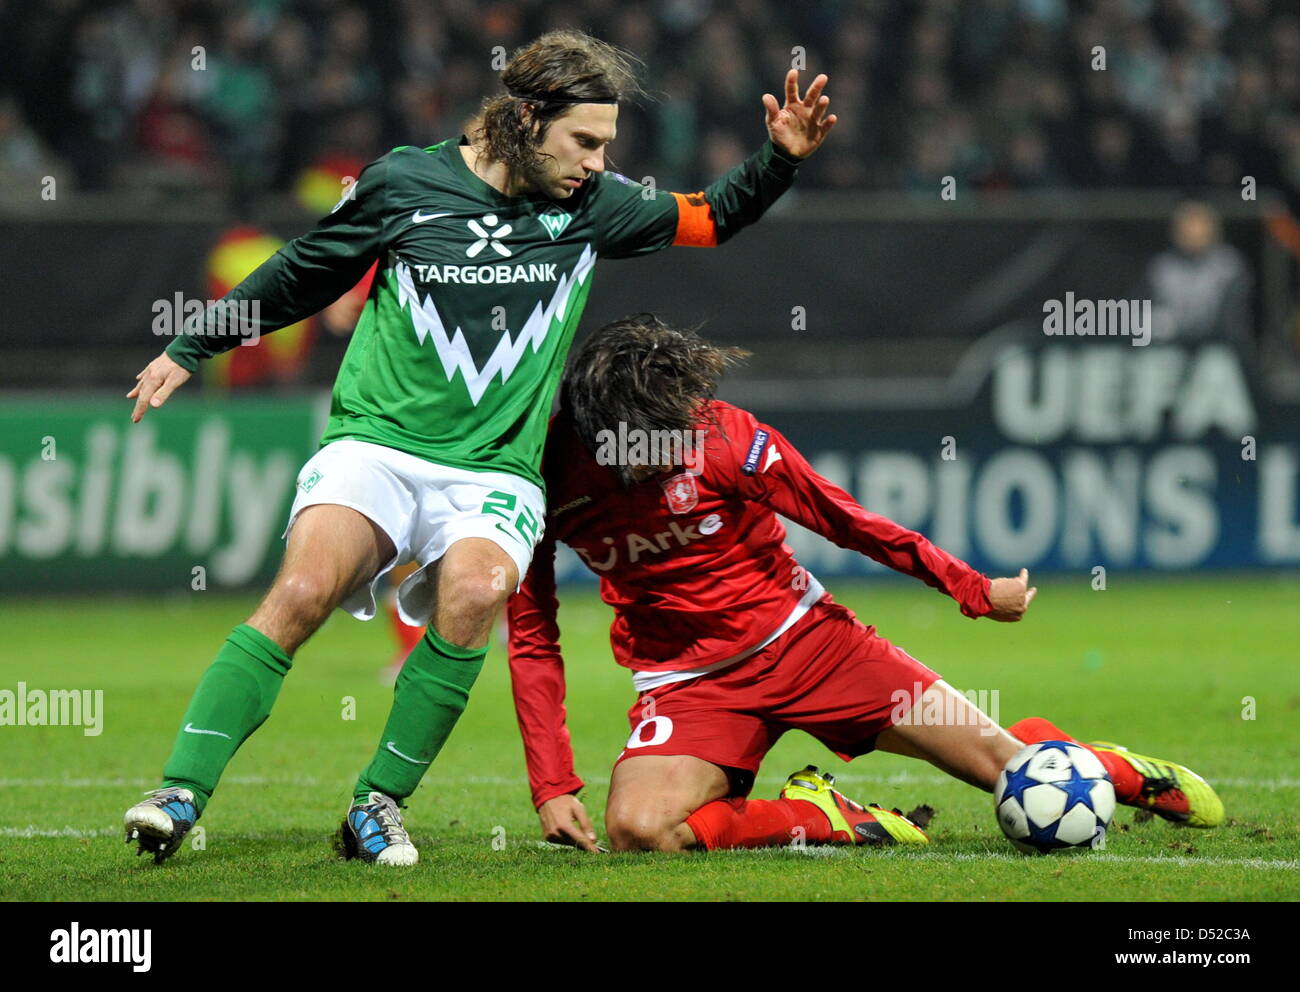 Werder's Torsten Frings (L) and Enschede's Bryan Ruiz vie for the ball during the Champions League group A match between Werder Bremen and FC Twente Enschede at the Weserstadion in Bremen, Germany 02 November 2010. Photo: Jochen Lübke Stock Photo